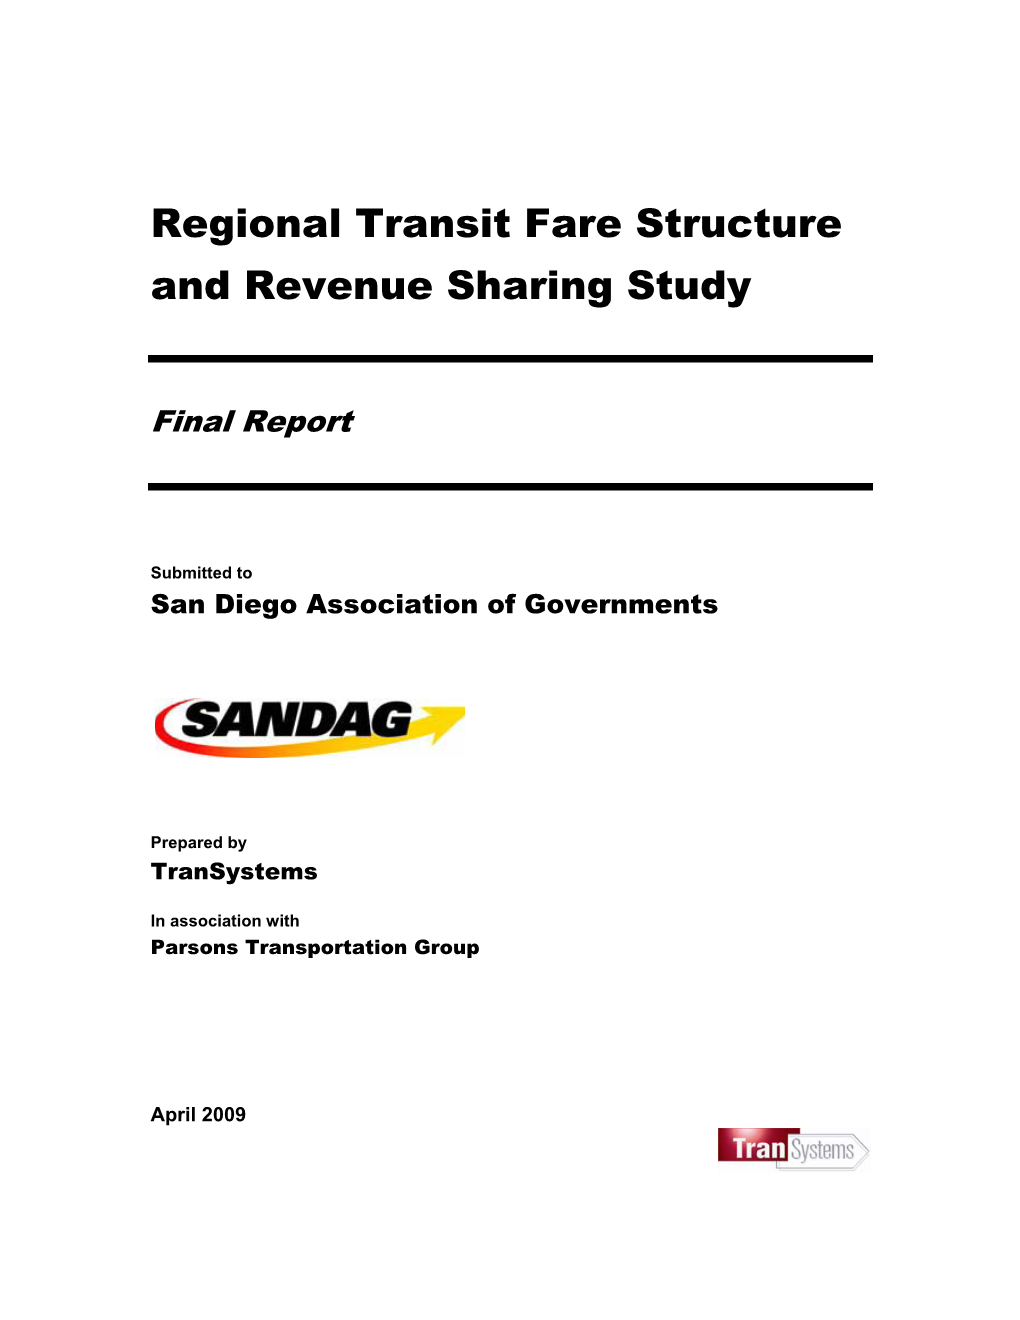 Regional Transit Fare Structure and Revenue Sharing Study